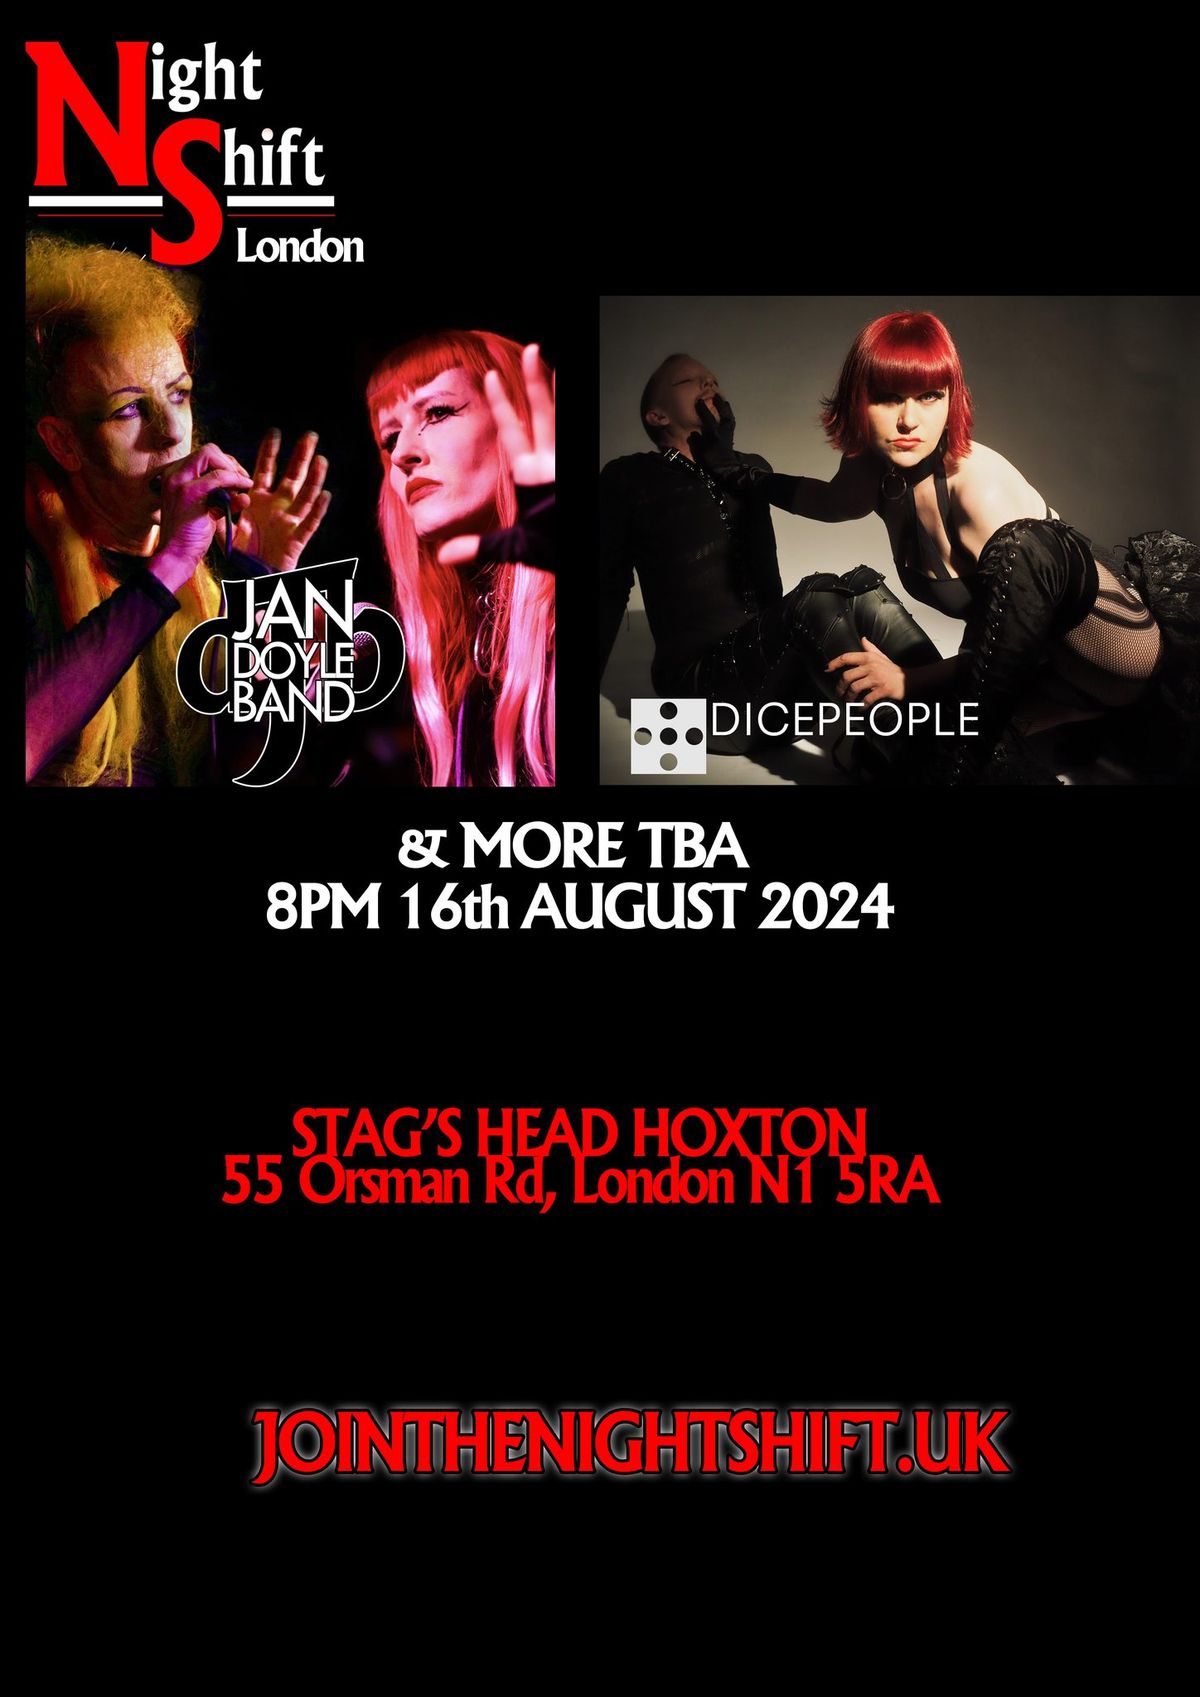 Night Shift London: Jan Doyle Band. Dicepeople & more (16th August)